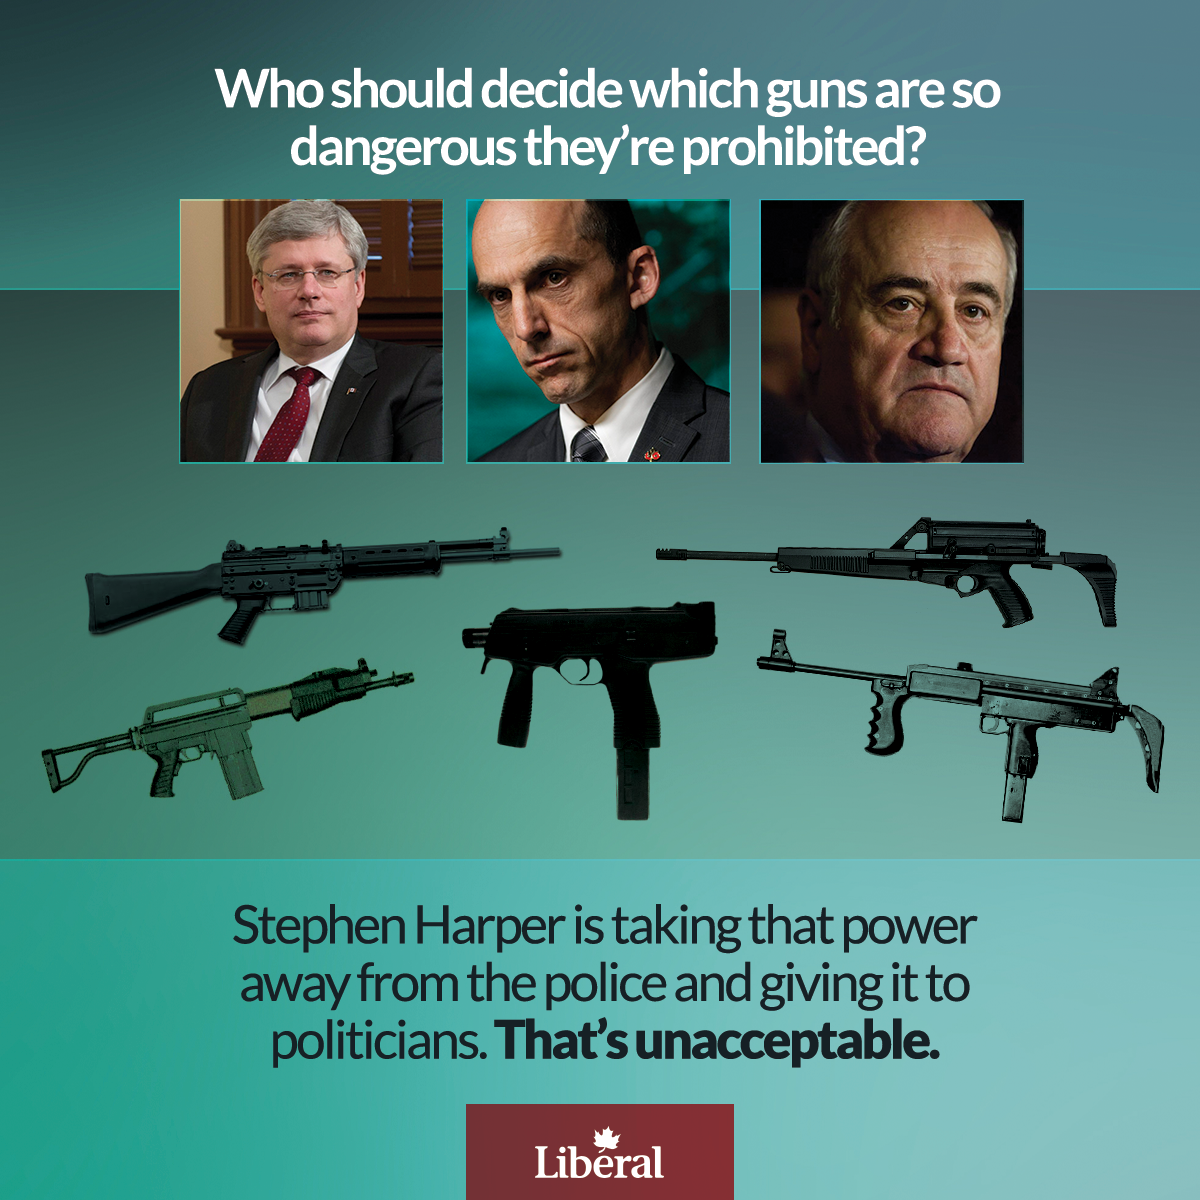 Who should decide which guns are so dangerous they're prohibited? Stephen Harper is taking that power away from the police and giving it to politicians. That's unacceptable.